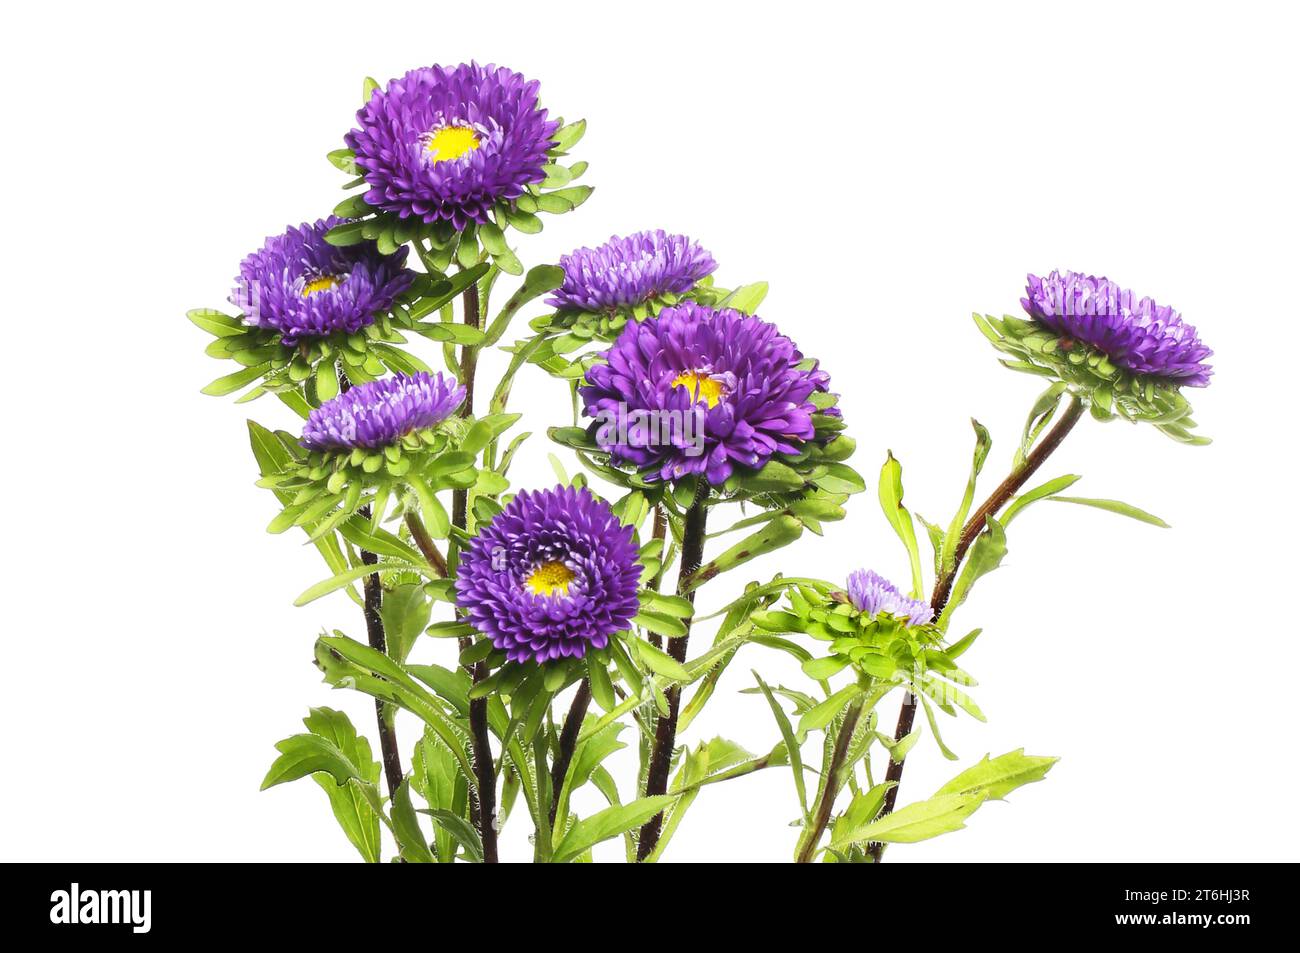 Group of aster flowers and foliage isolated against white Stock Photo